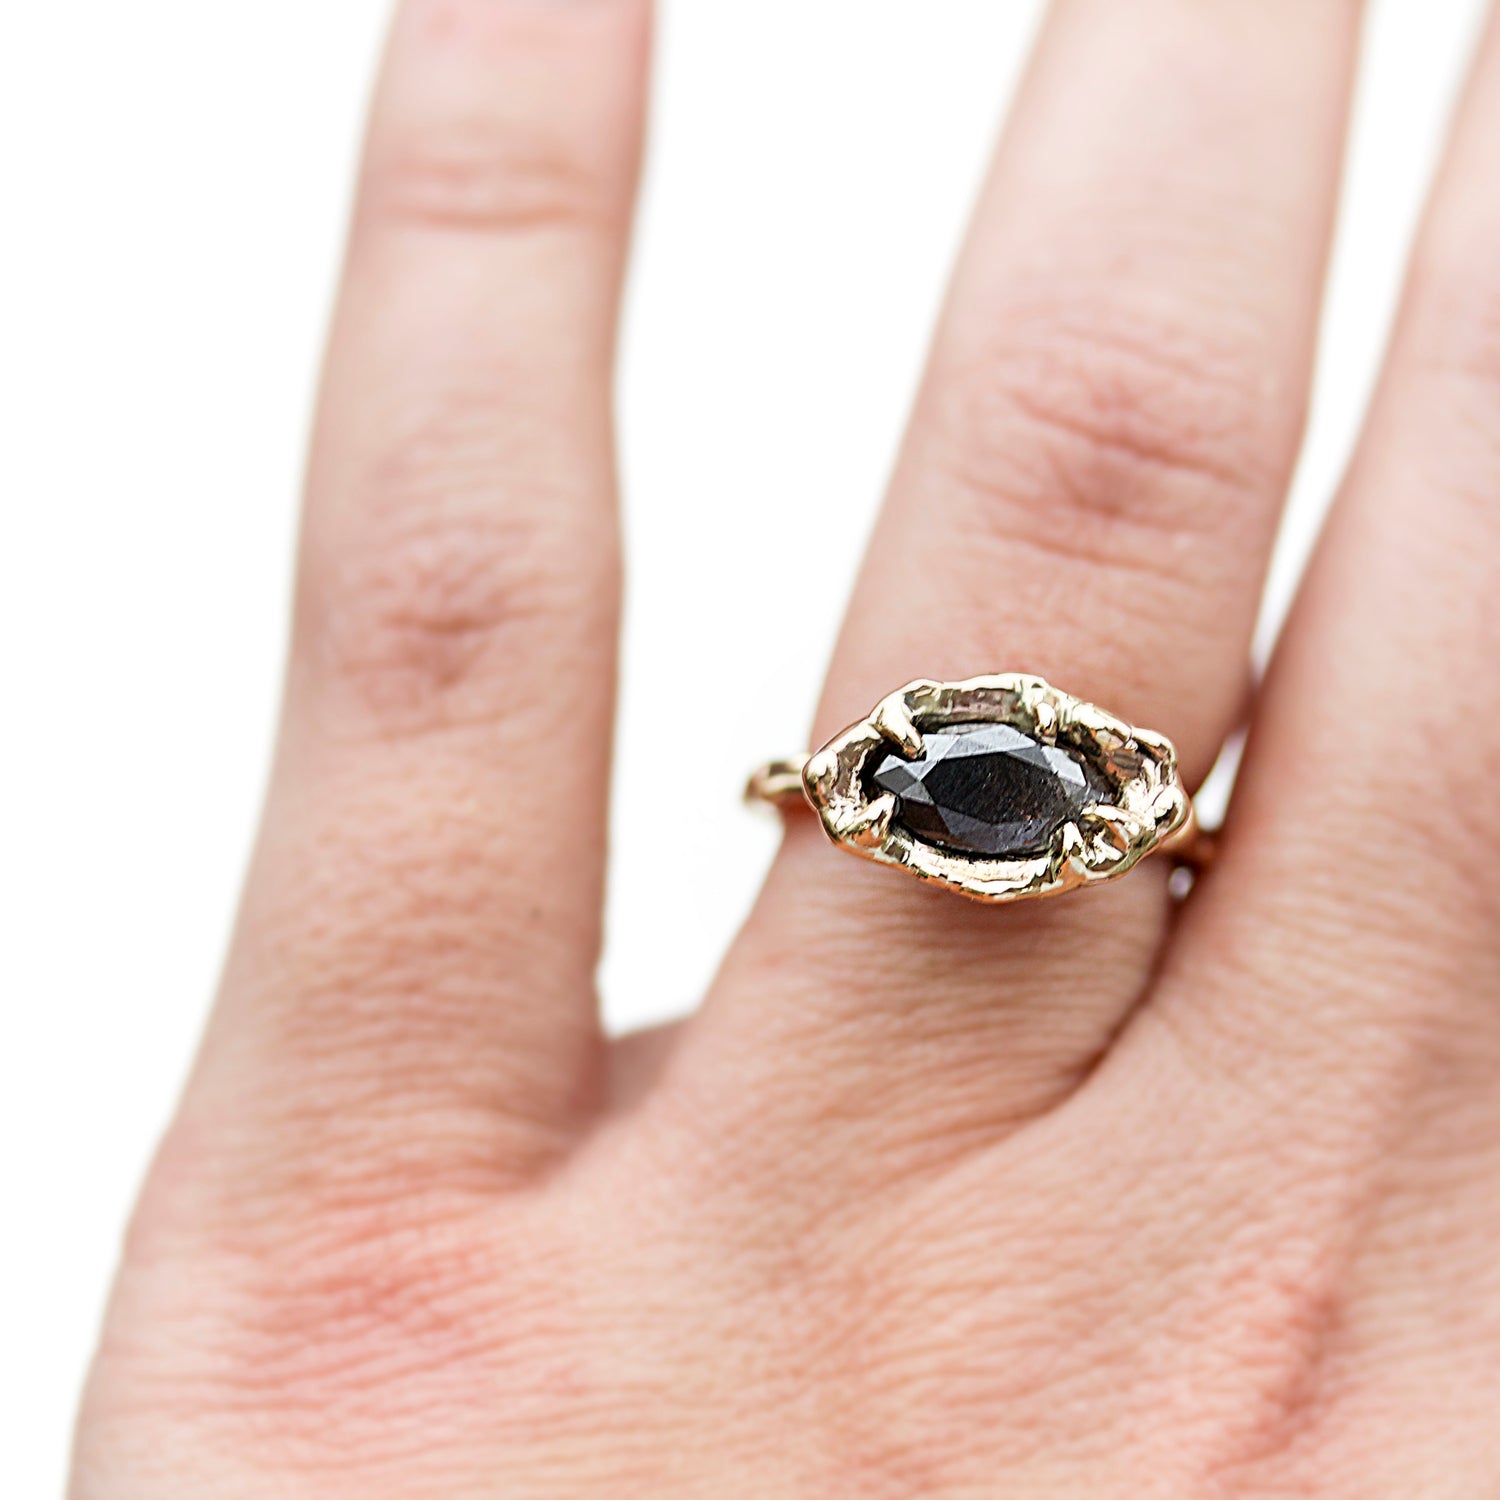 unique handmade rustic black diamond engagement ring with hand wrought organic nature inspired dewdrop or water texture details